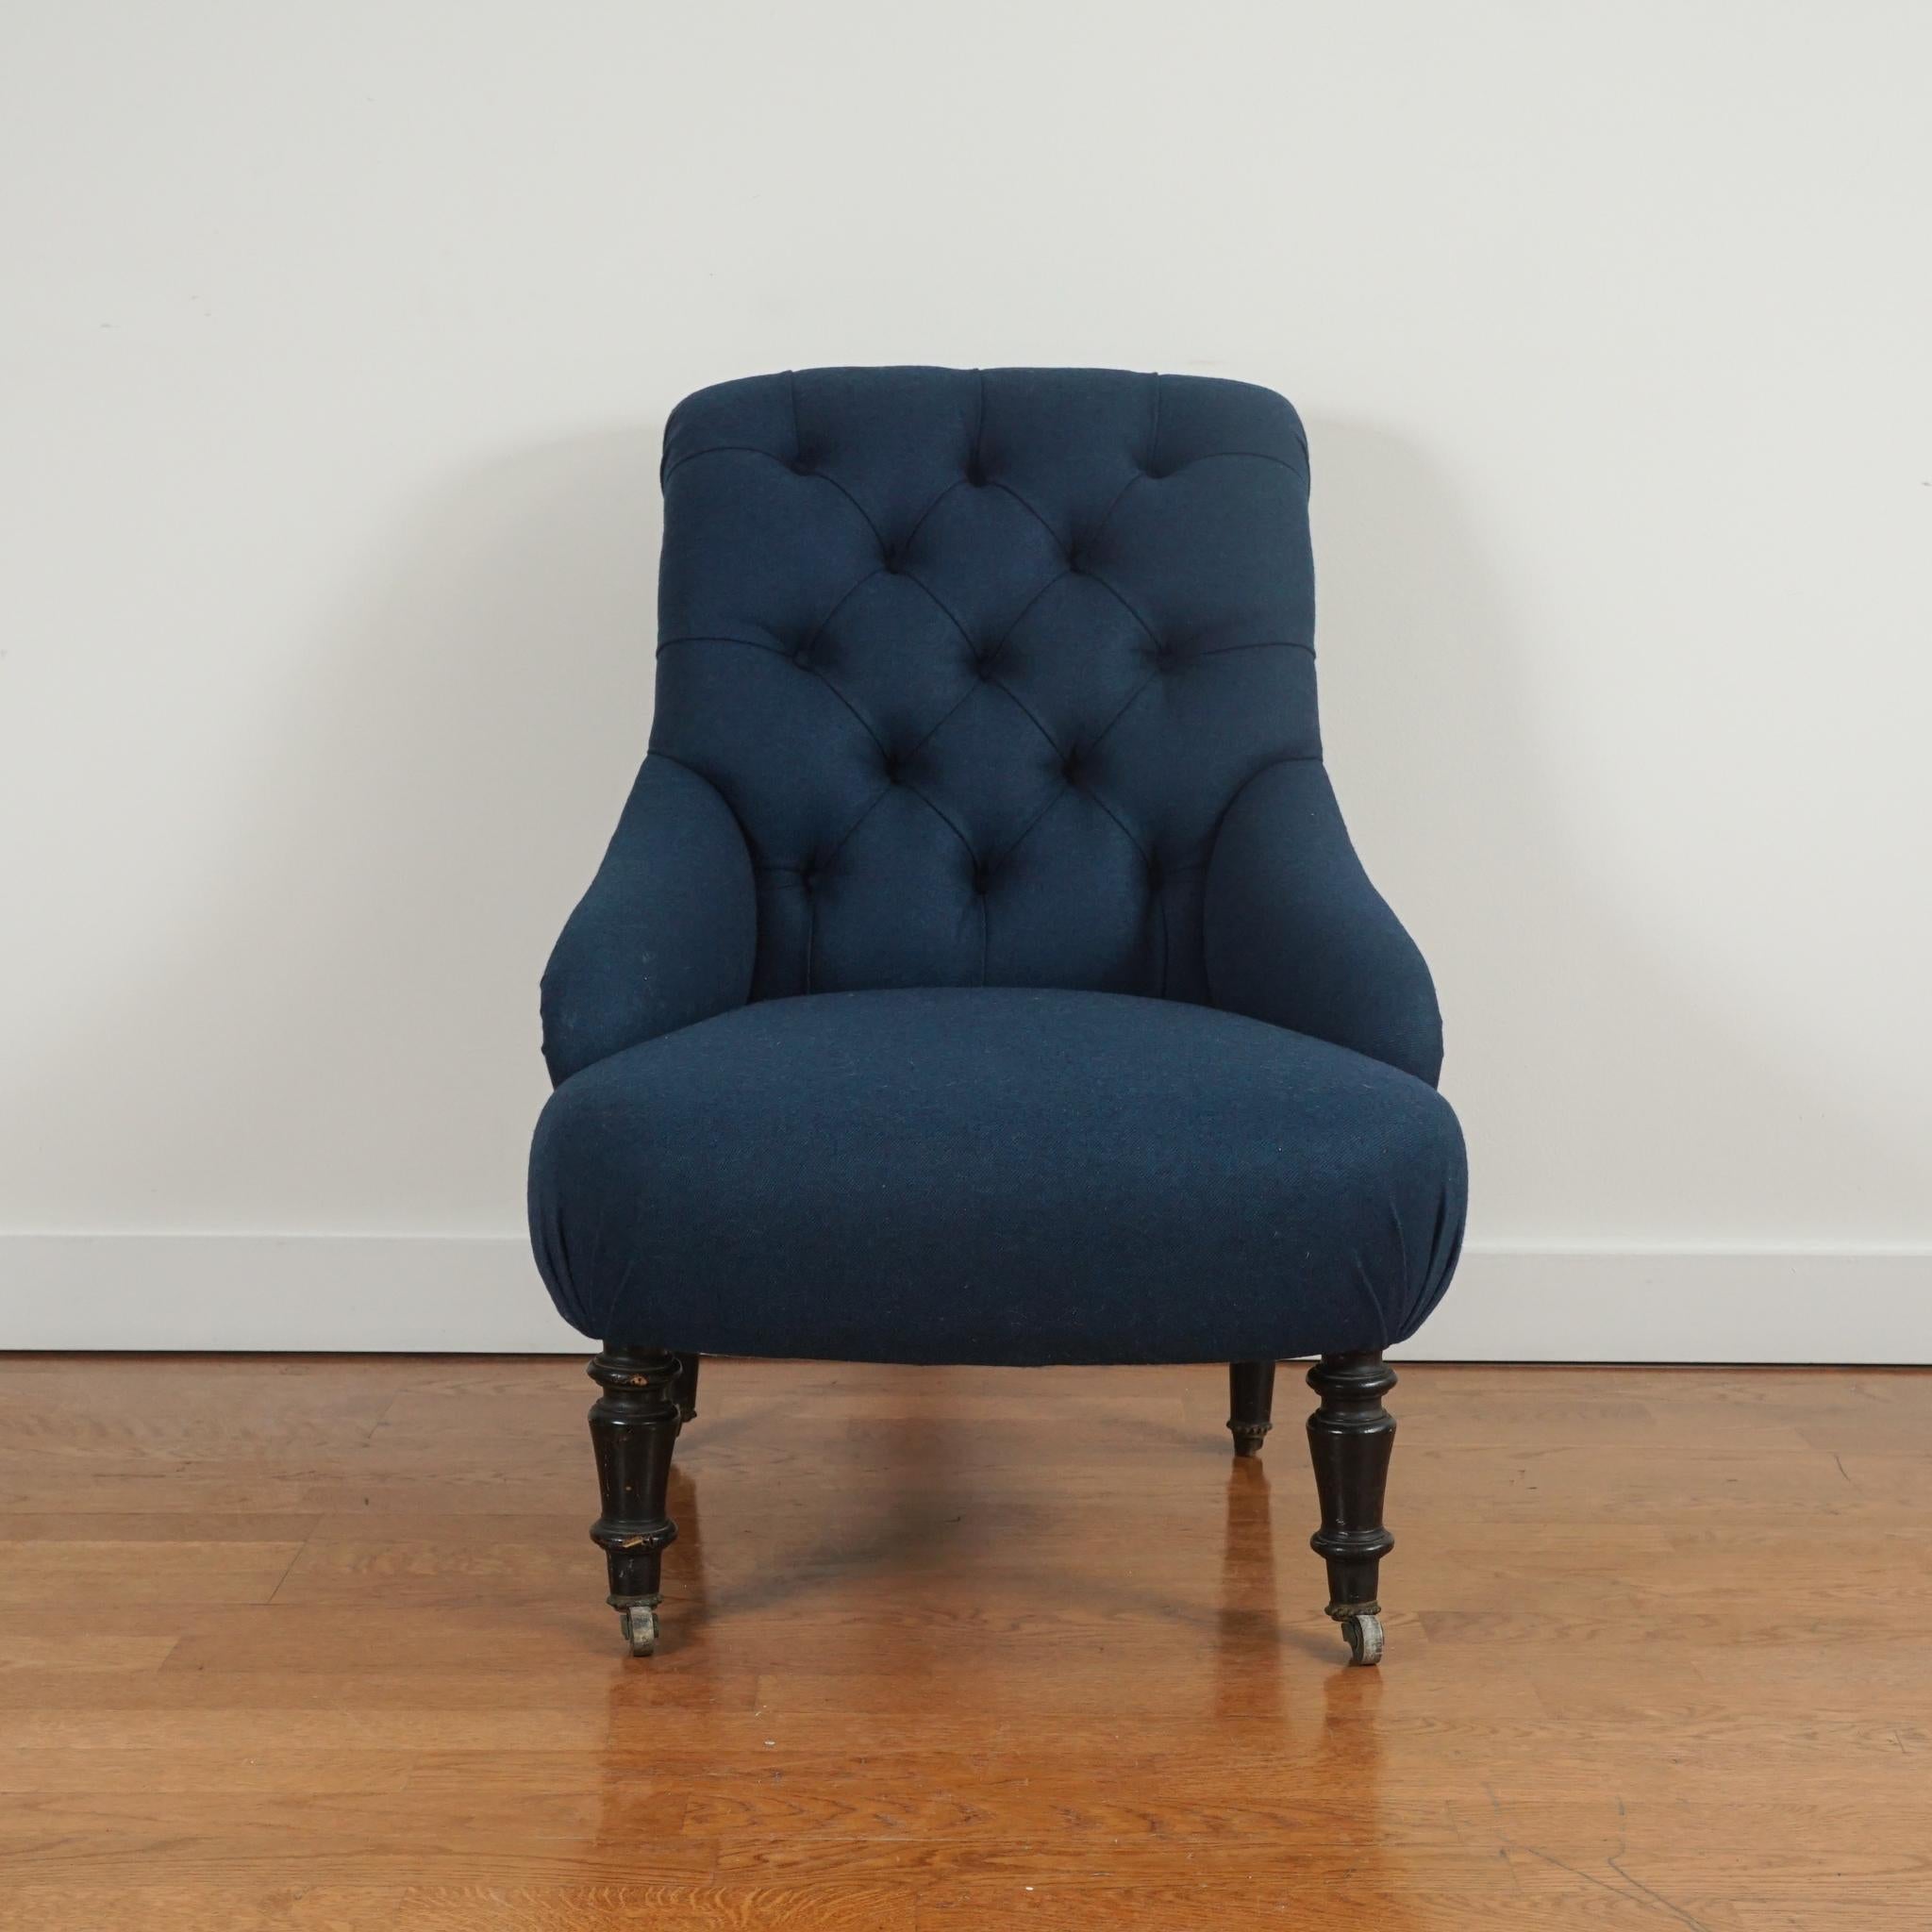 The vintage Victorian slipper chair, shown here, has been reupholstered in a Coraggio peacock-colored Venetian wool blend. The tufted back and tight seat are original to the chair as are the turned wood legs which were also restored. Despite the